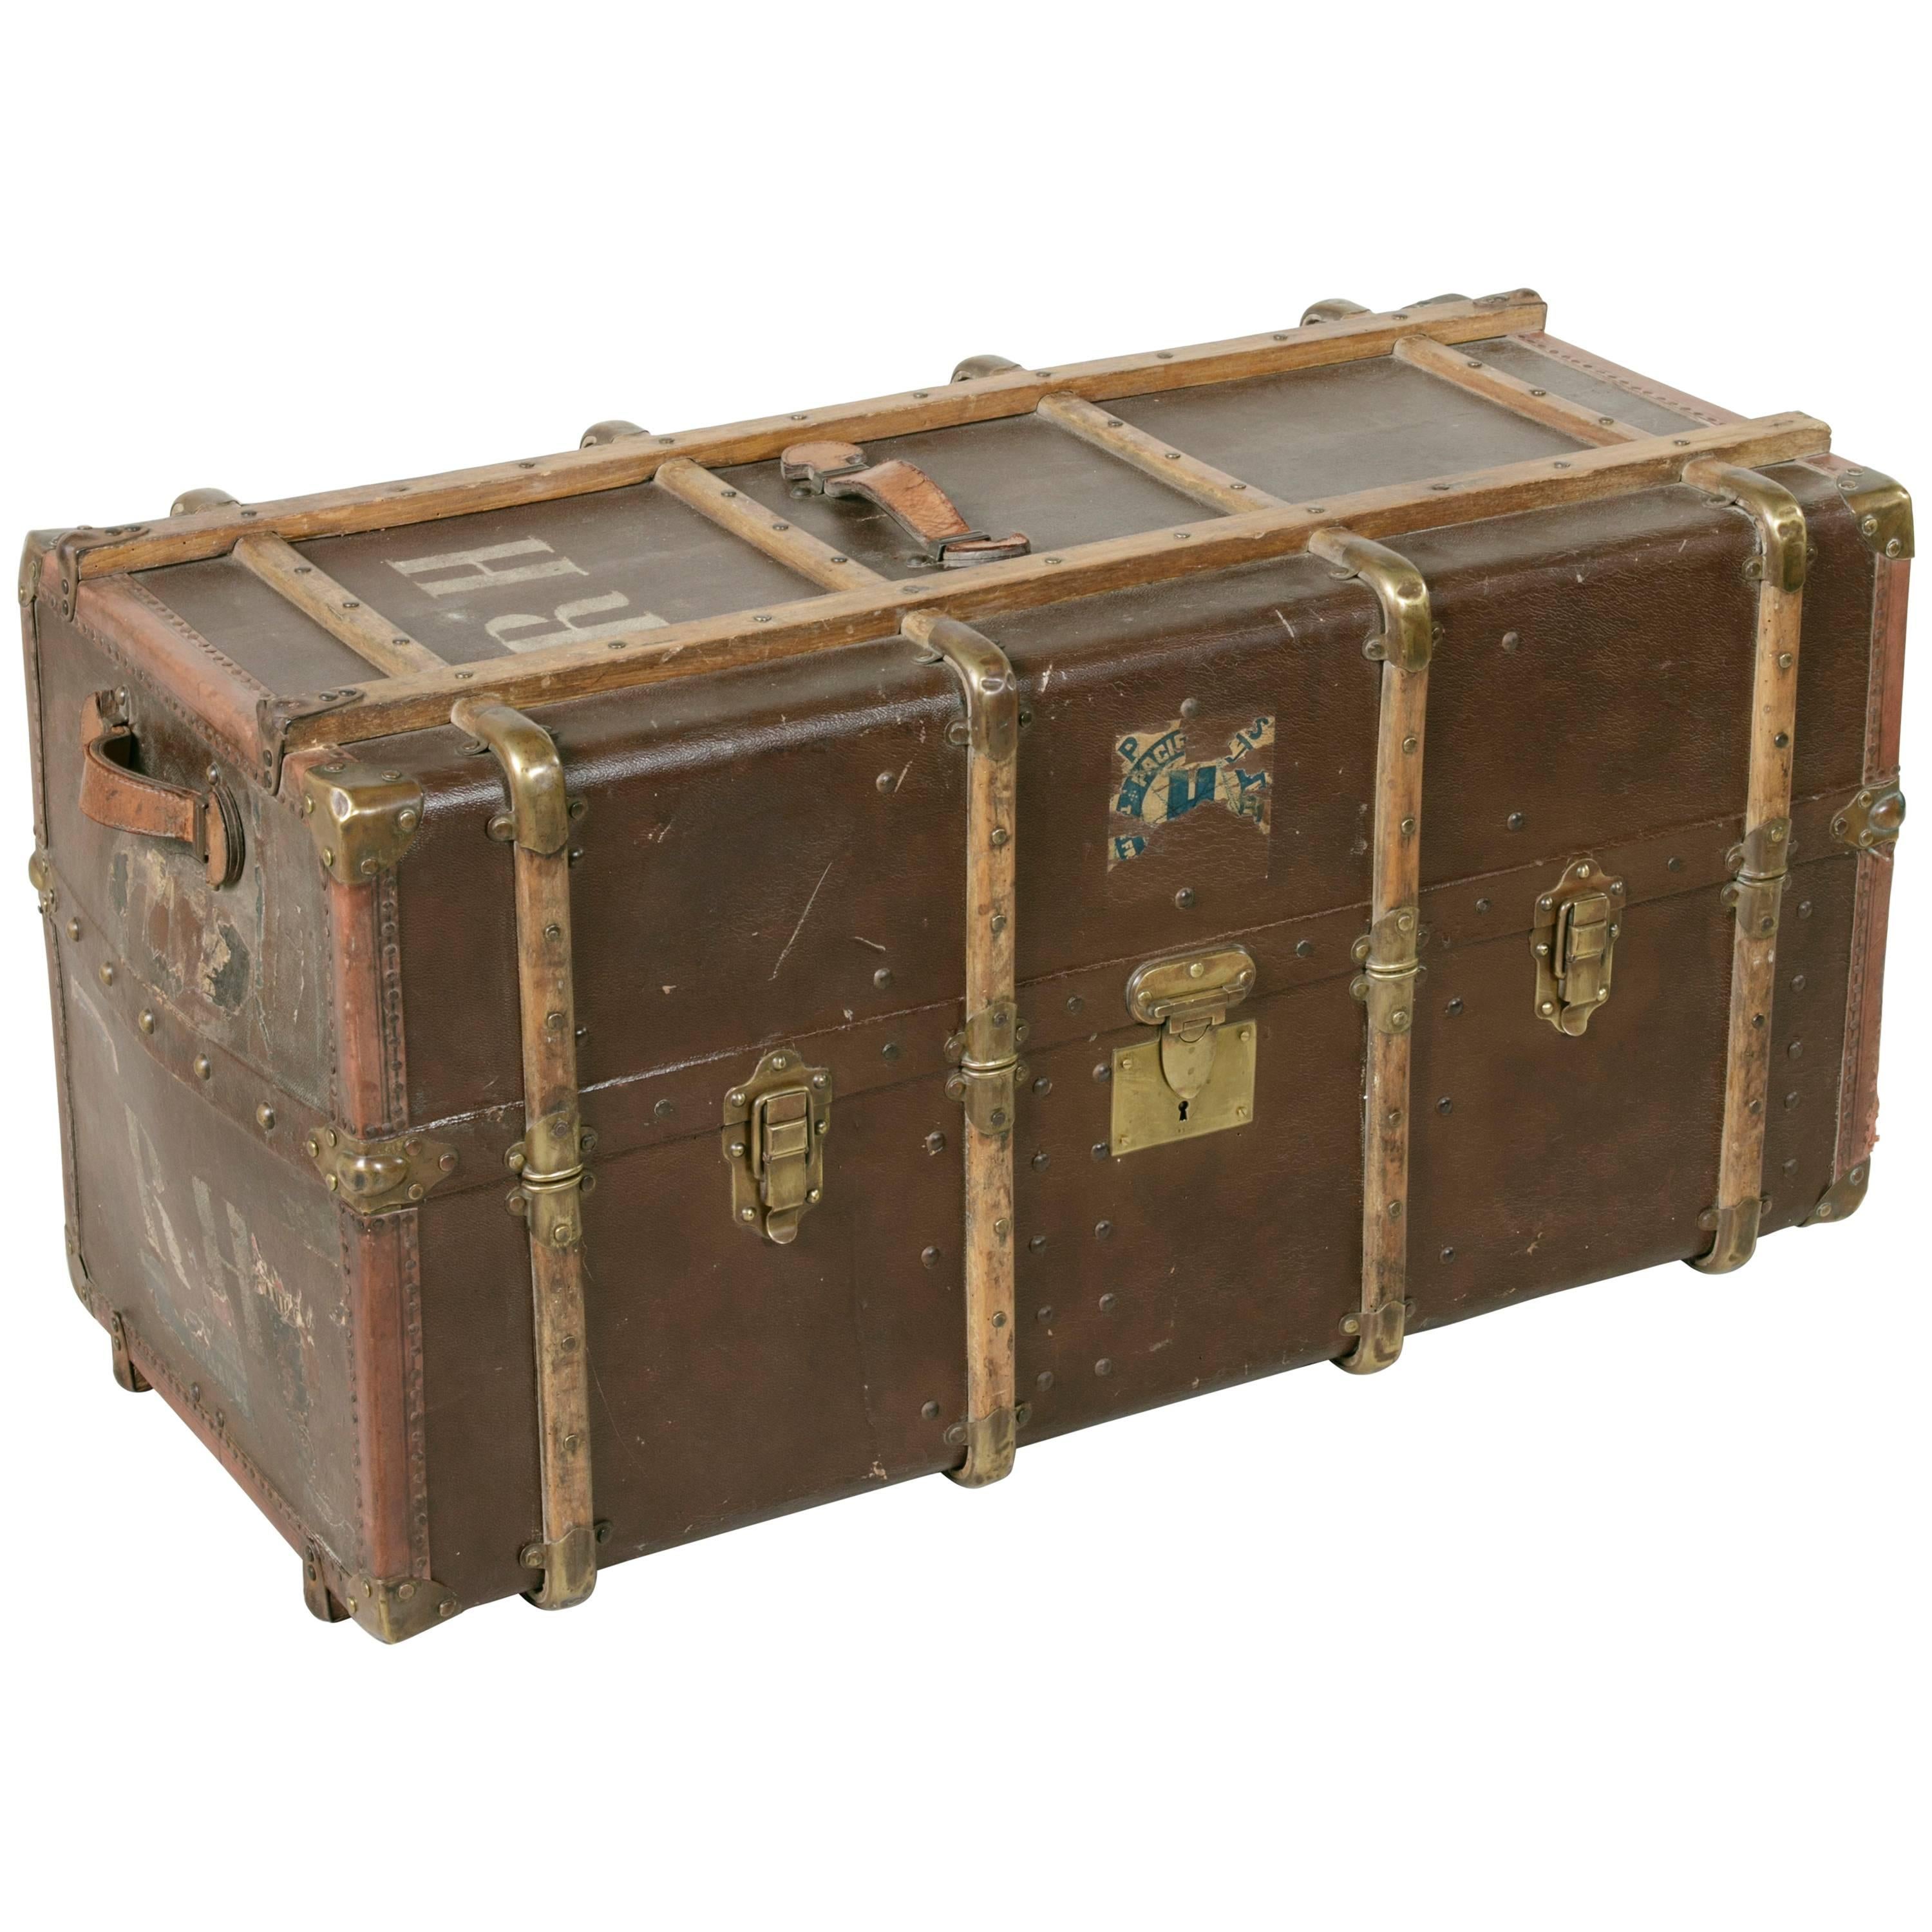 A beautiful, classic and large example of turn-of-the-century travel luggage, this antique French steam trunk features all of the quintessential details, down to its lovely aged travel sticker remnants and initials. The exterior is of a rich brown